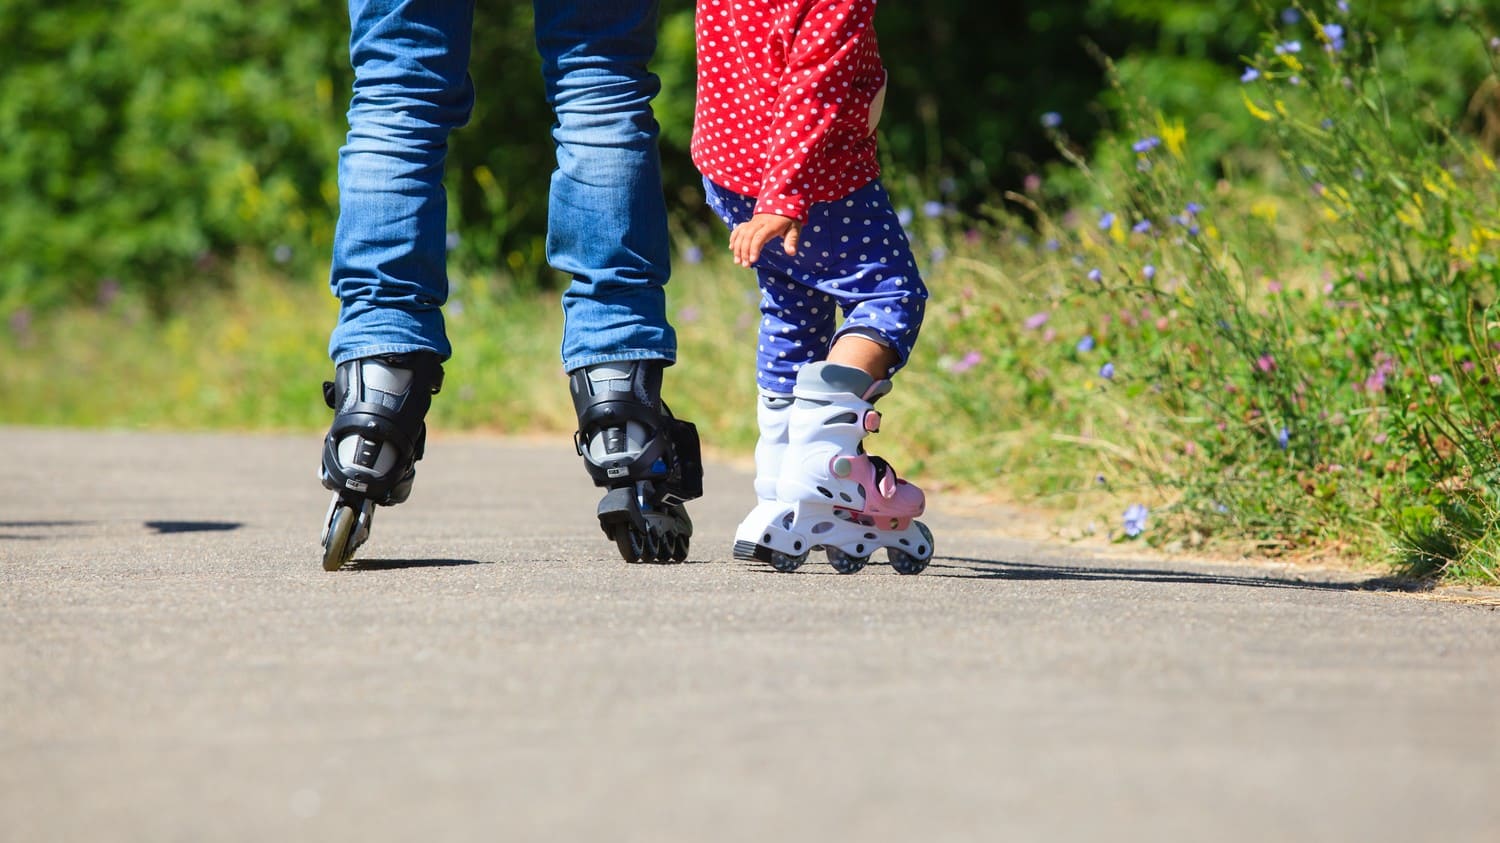 Persons wearing roller skates gliding gracefully on a smooth surface.